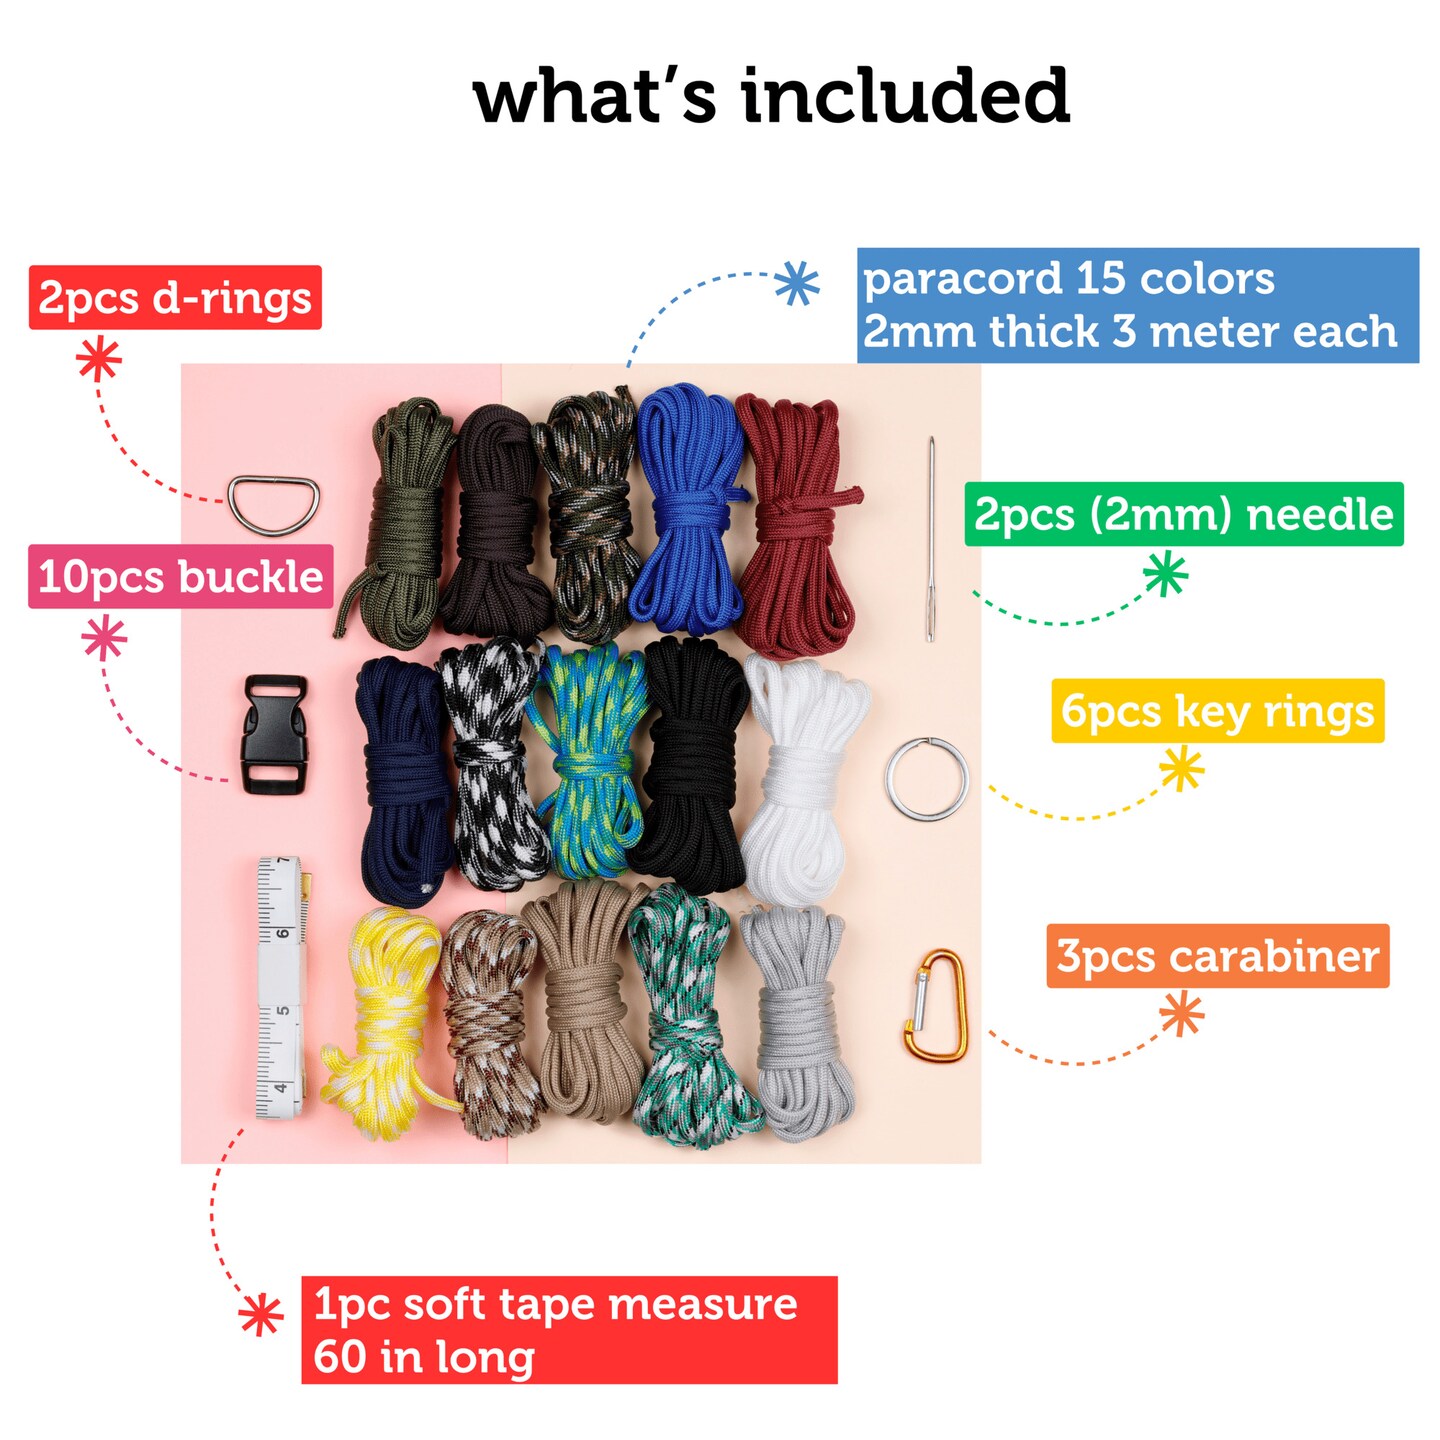 Incraftables Paracord kit with 15 Colors Paracord Rope (2mm), Buckle, Keyring, Carabiner &#x26; More. Best Paracord Bracelet Making Set for Lanyards, Dog Collars, Parachute Cord &#x26; Survival Rope